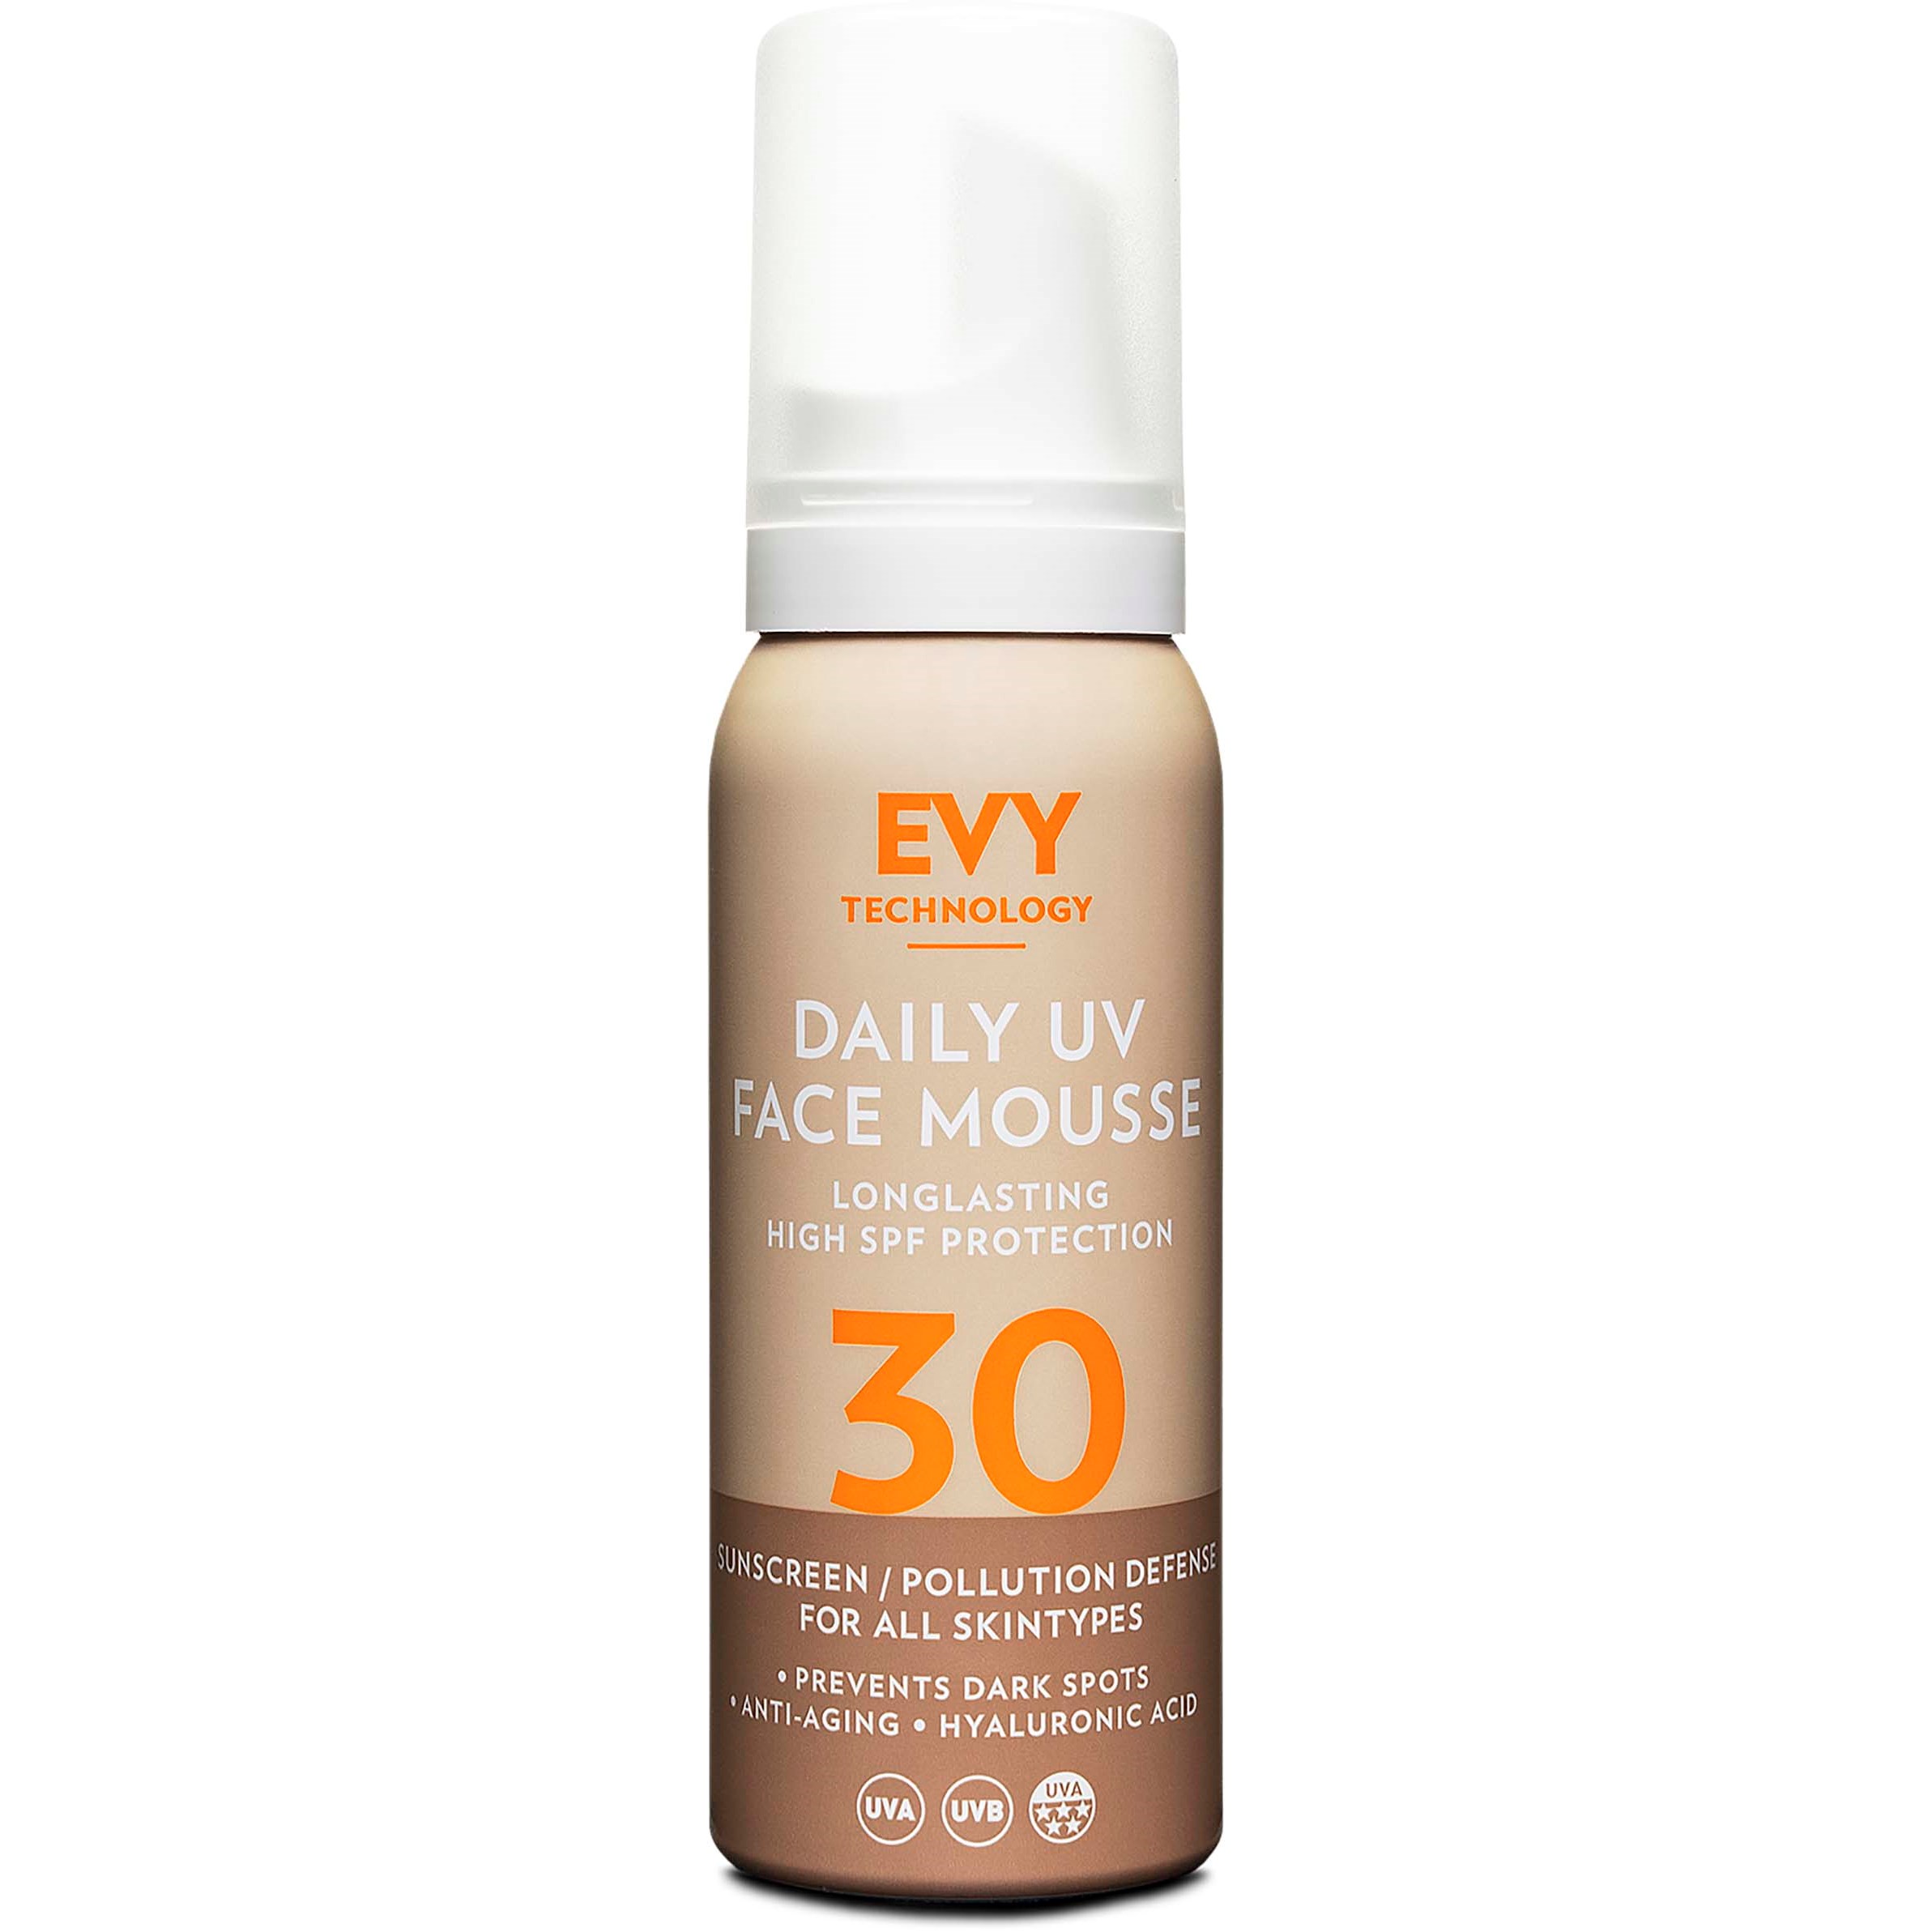 EVY Daily UV Face Mousse SPF 30 - 75ml